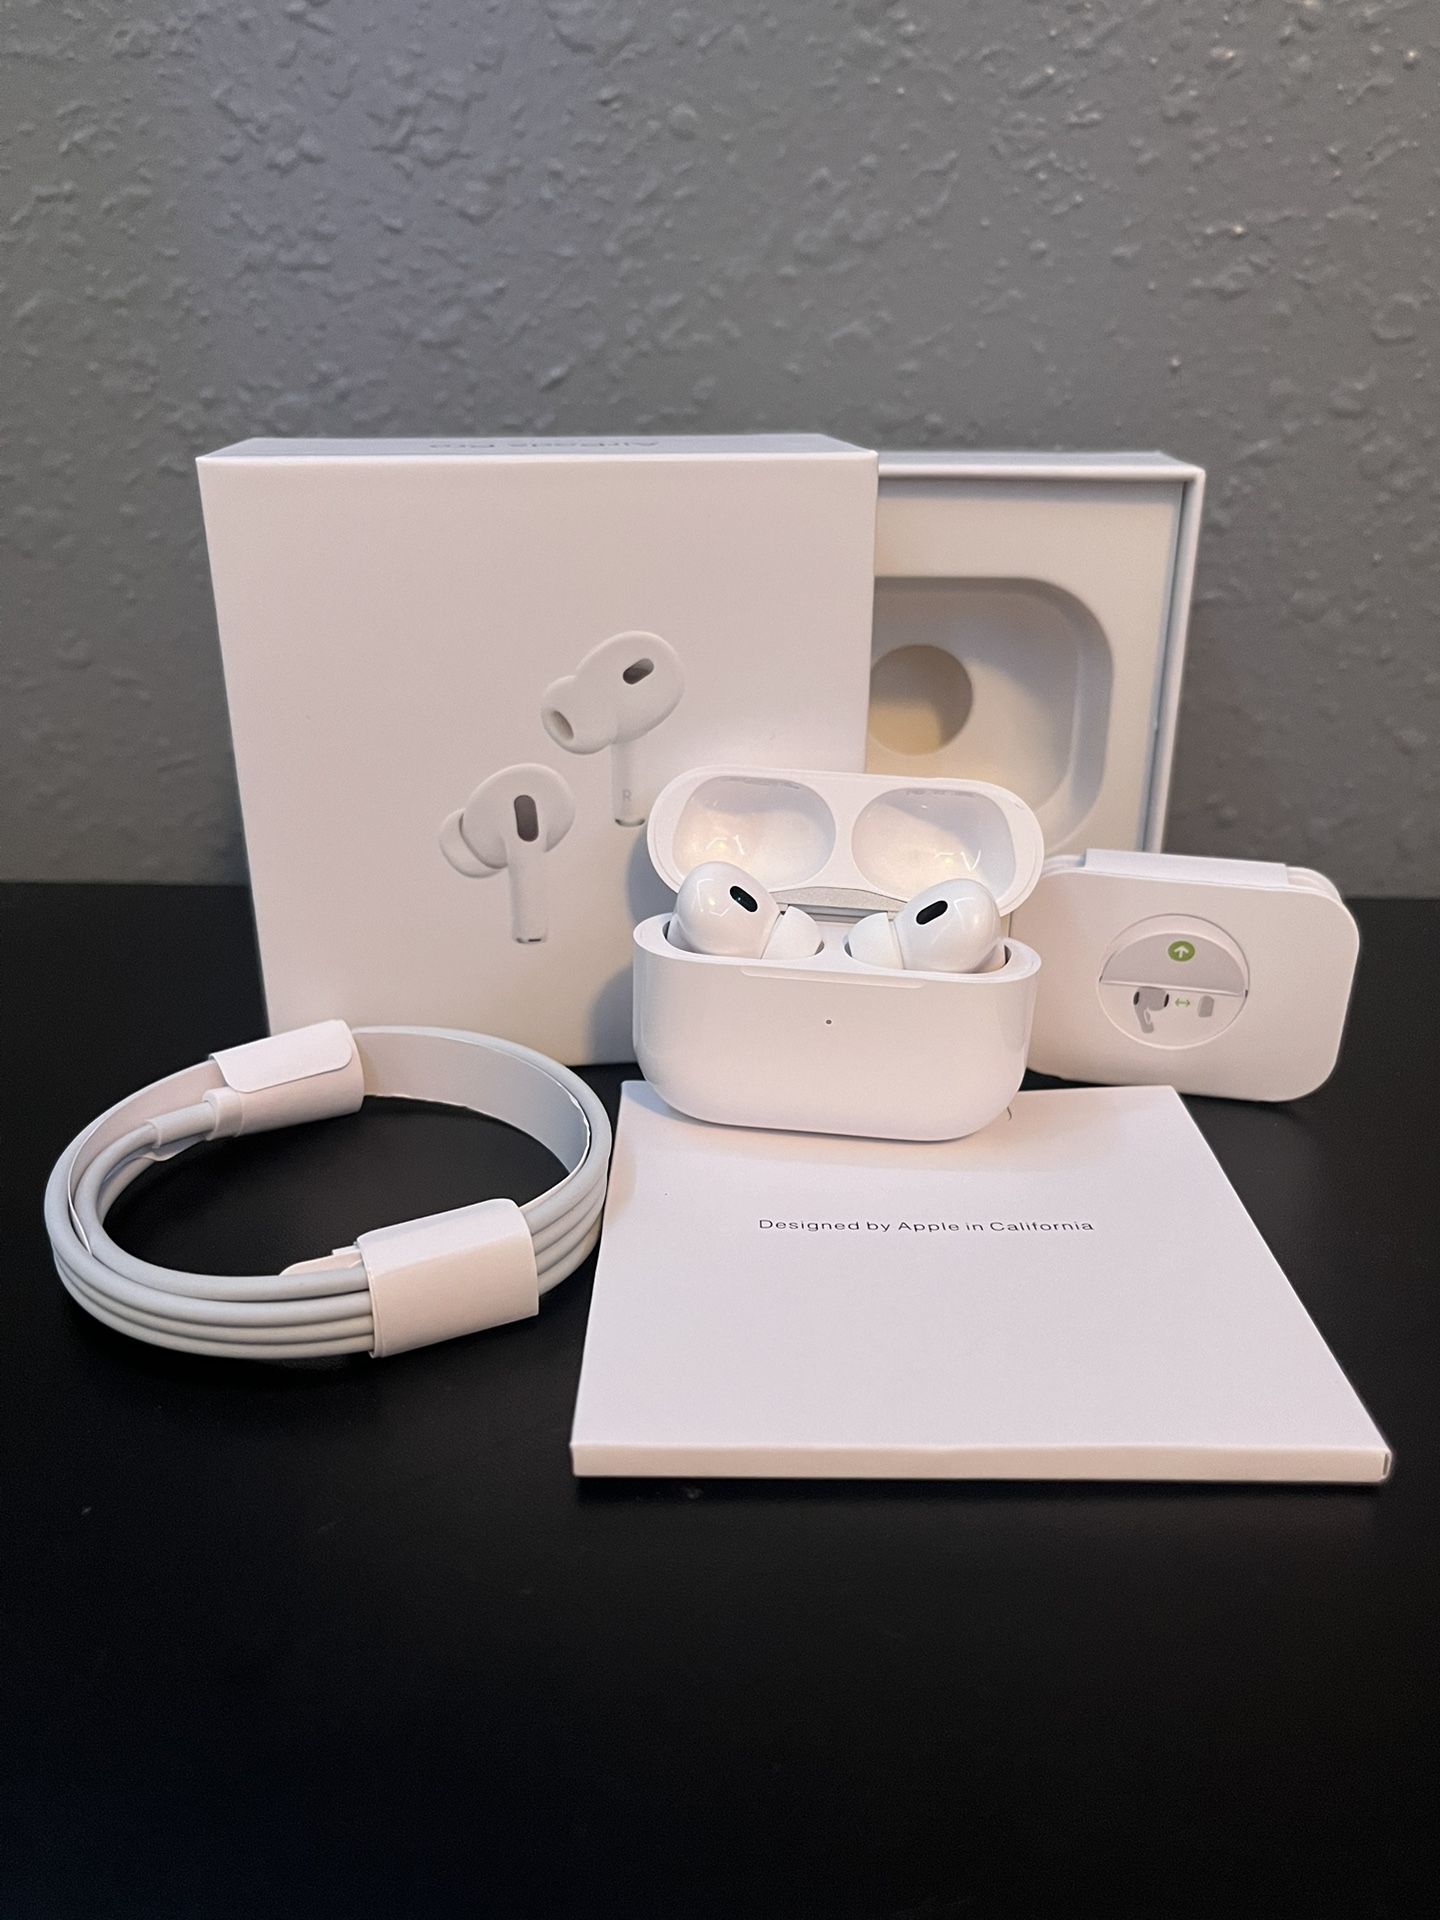 Apple AirPods Pro 2nd Generation with Wireless Charging Case - White